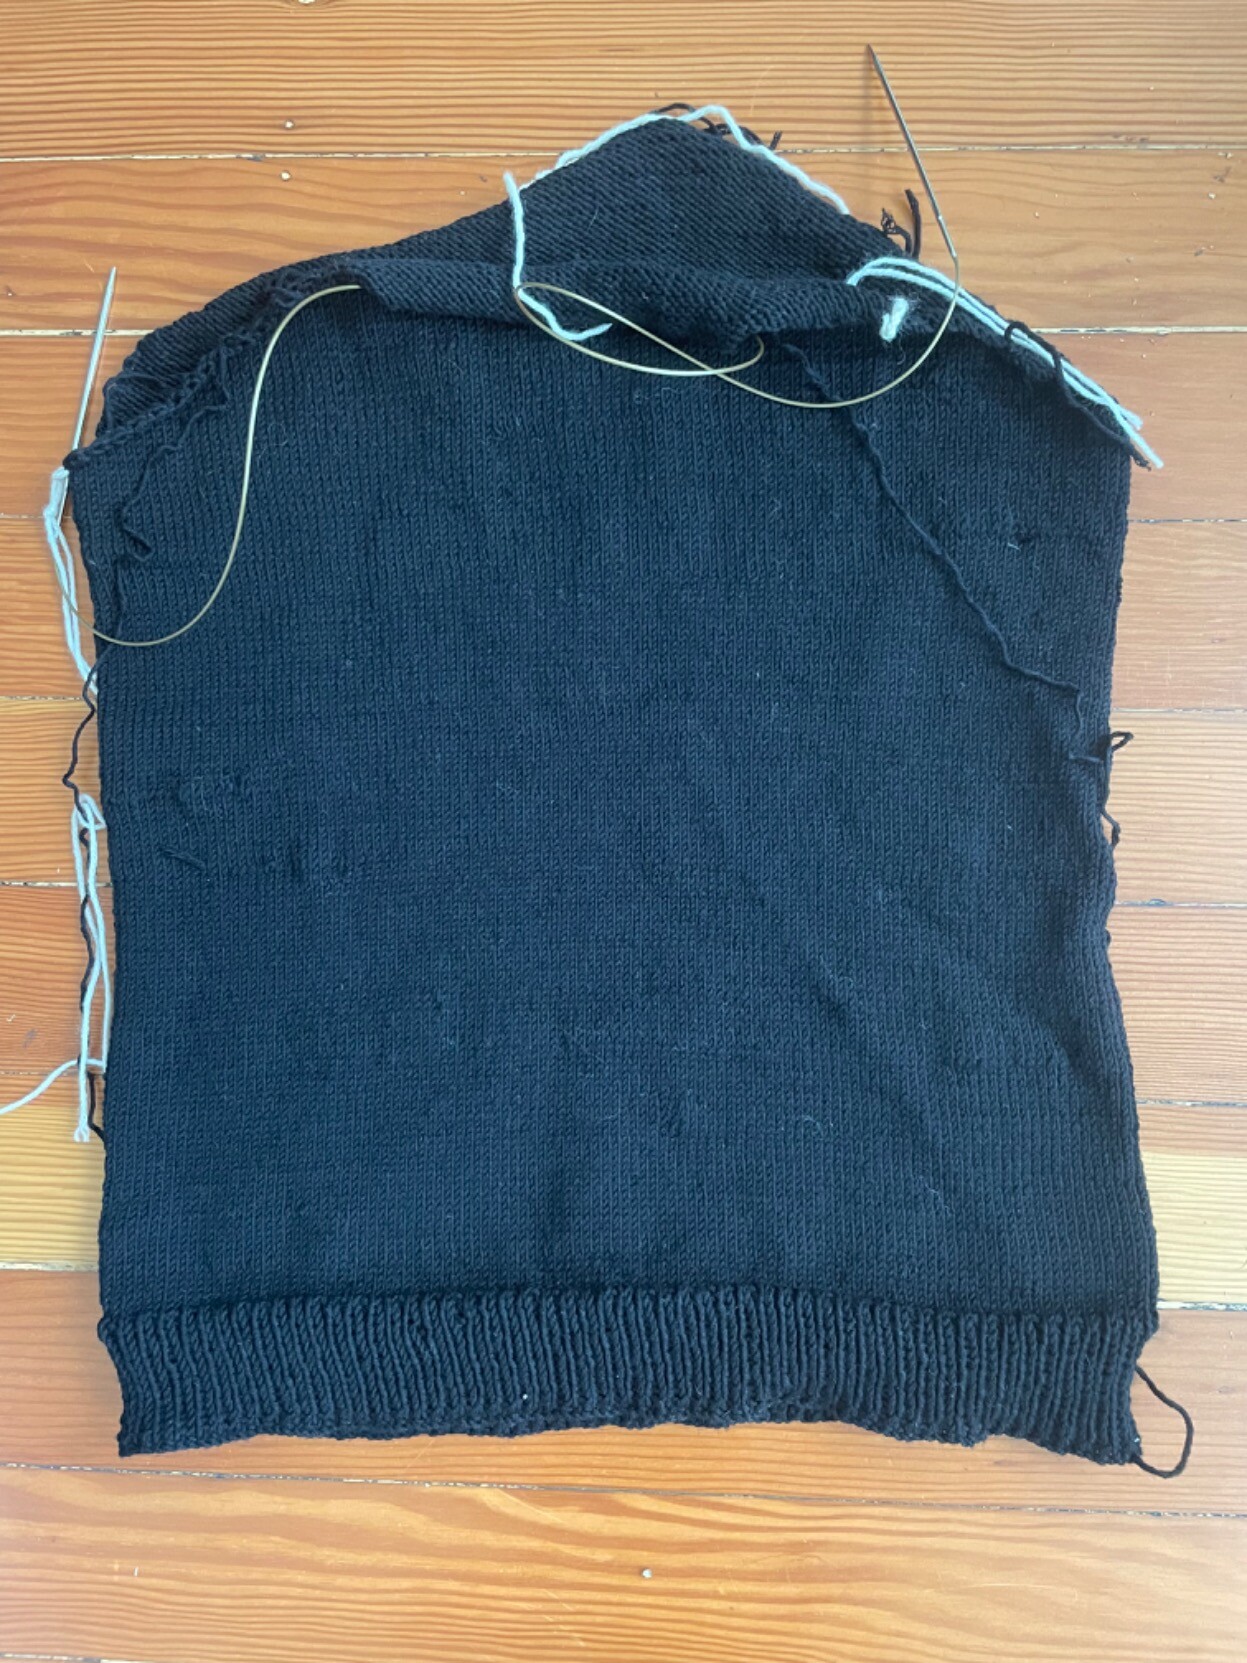 The body of a black sweater, still on the needles. The collar and sleeves aren’t done yet.